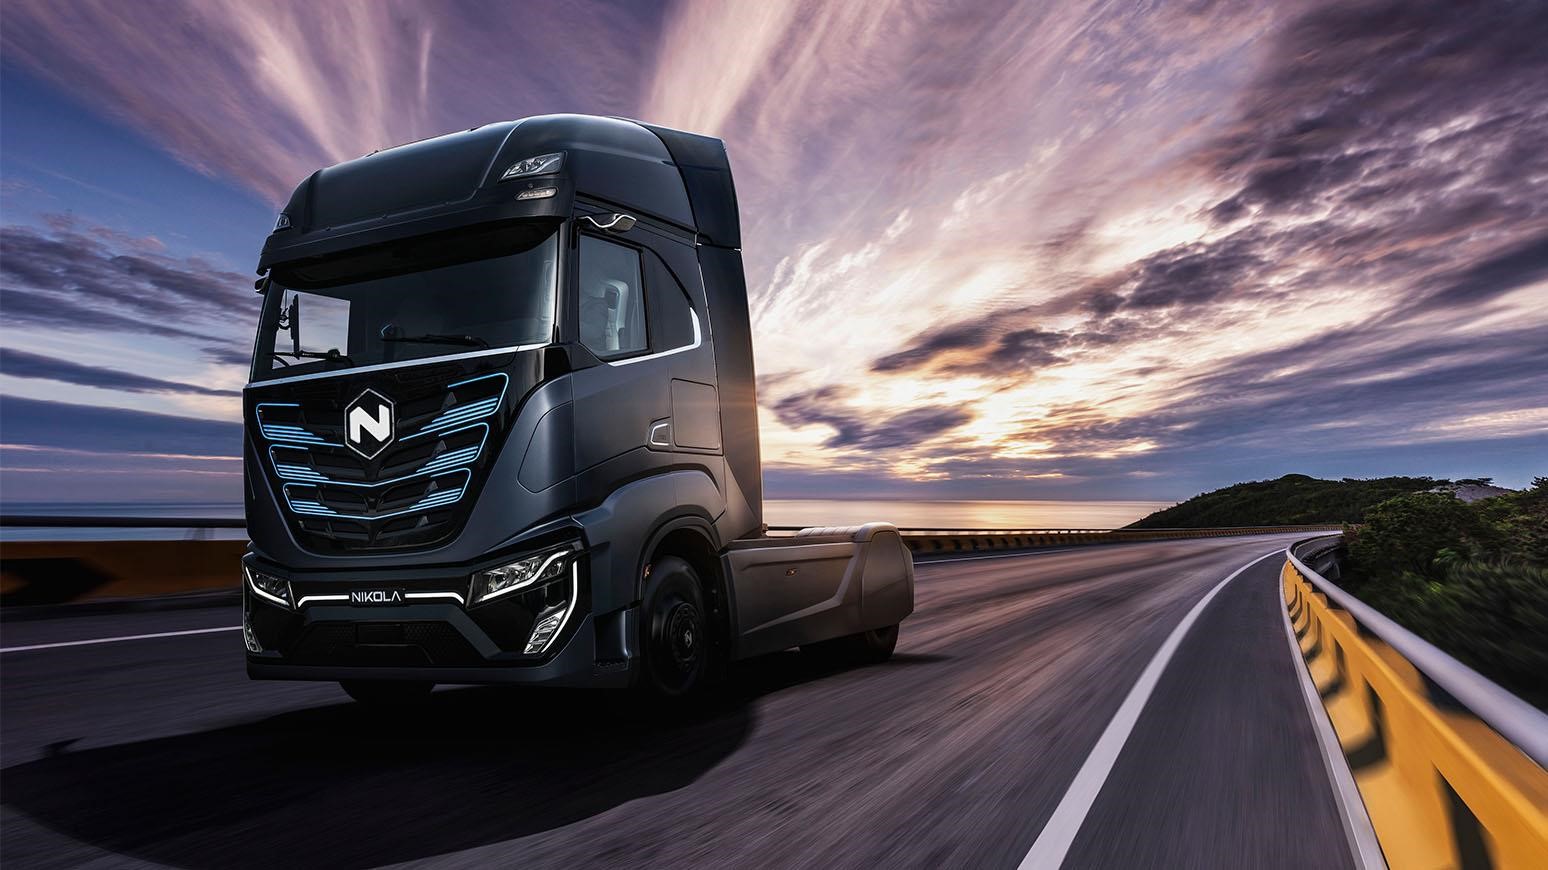 IVECO, FPT Industrial & NIKOLA Lay Out Strategy For Bringing Heavy-Duty Zero-Emissions Trucks To Europe & North America